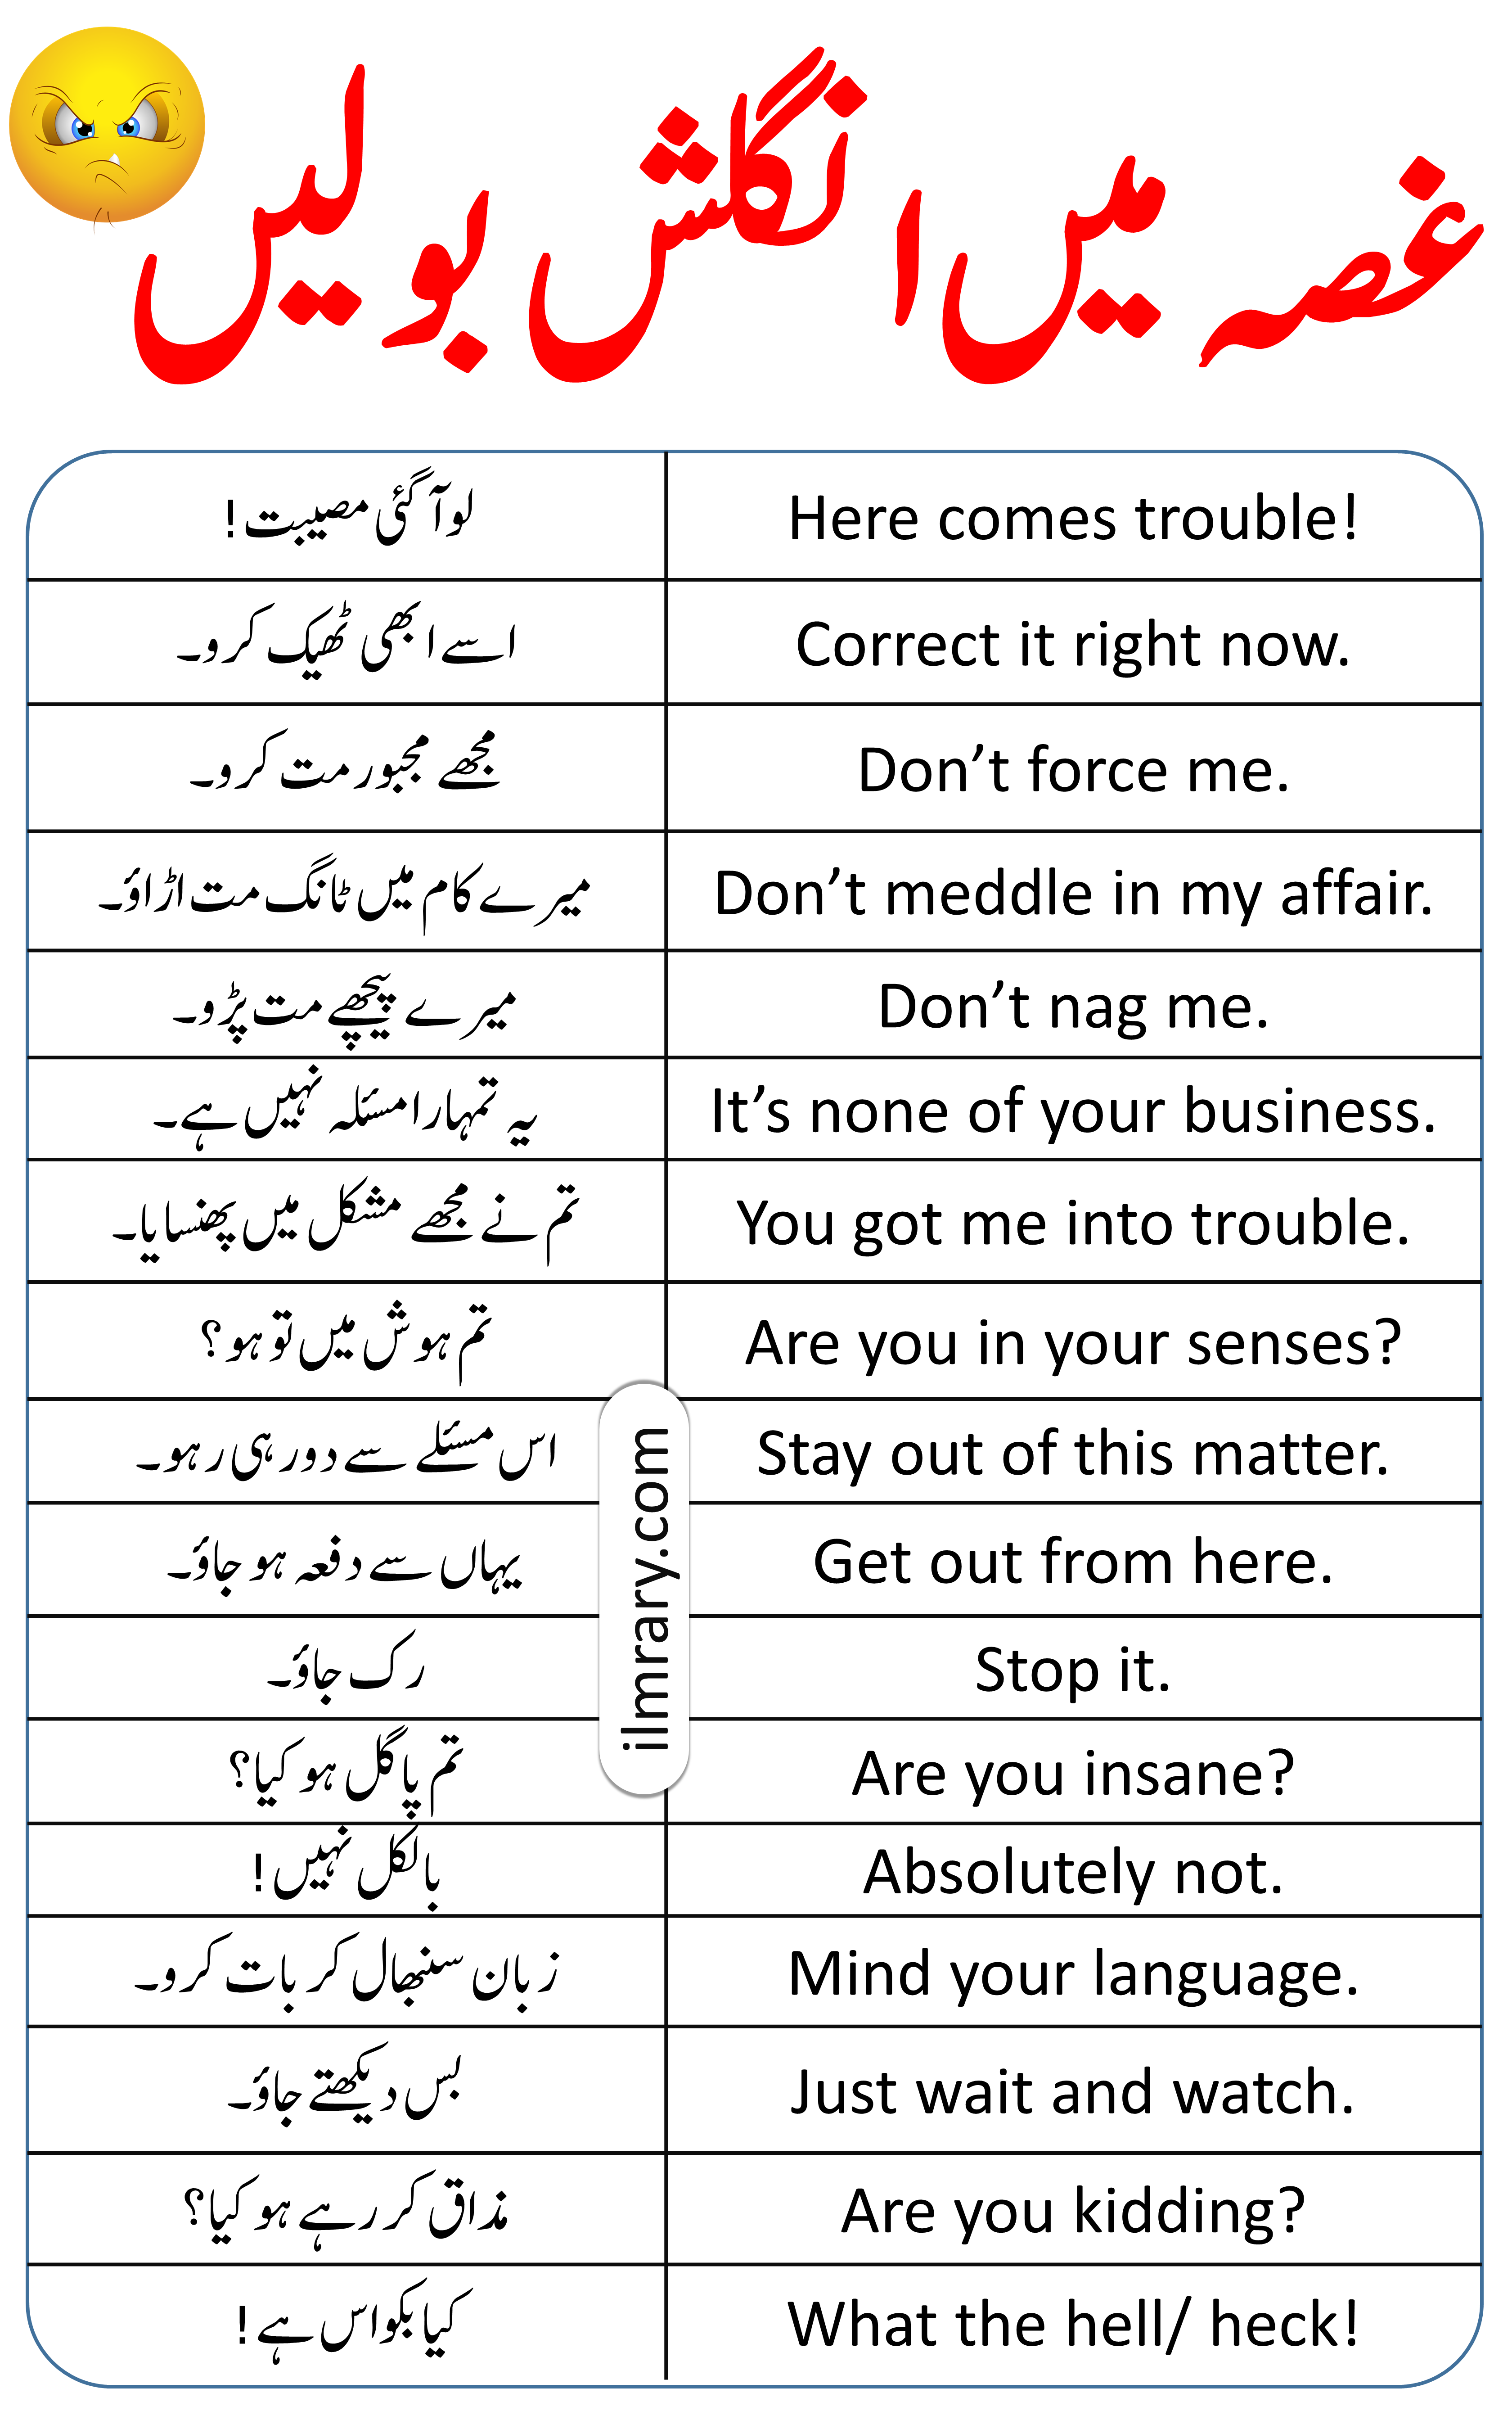 35 Daily Use Anger Sentences in English with Urdu Translation